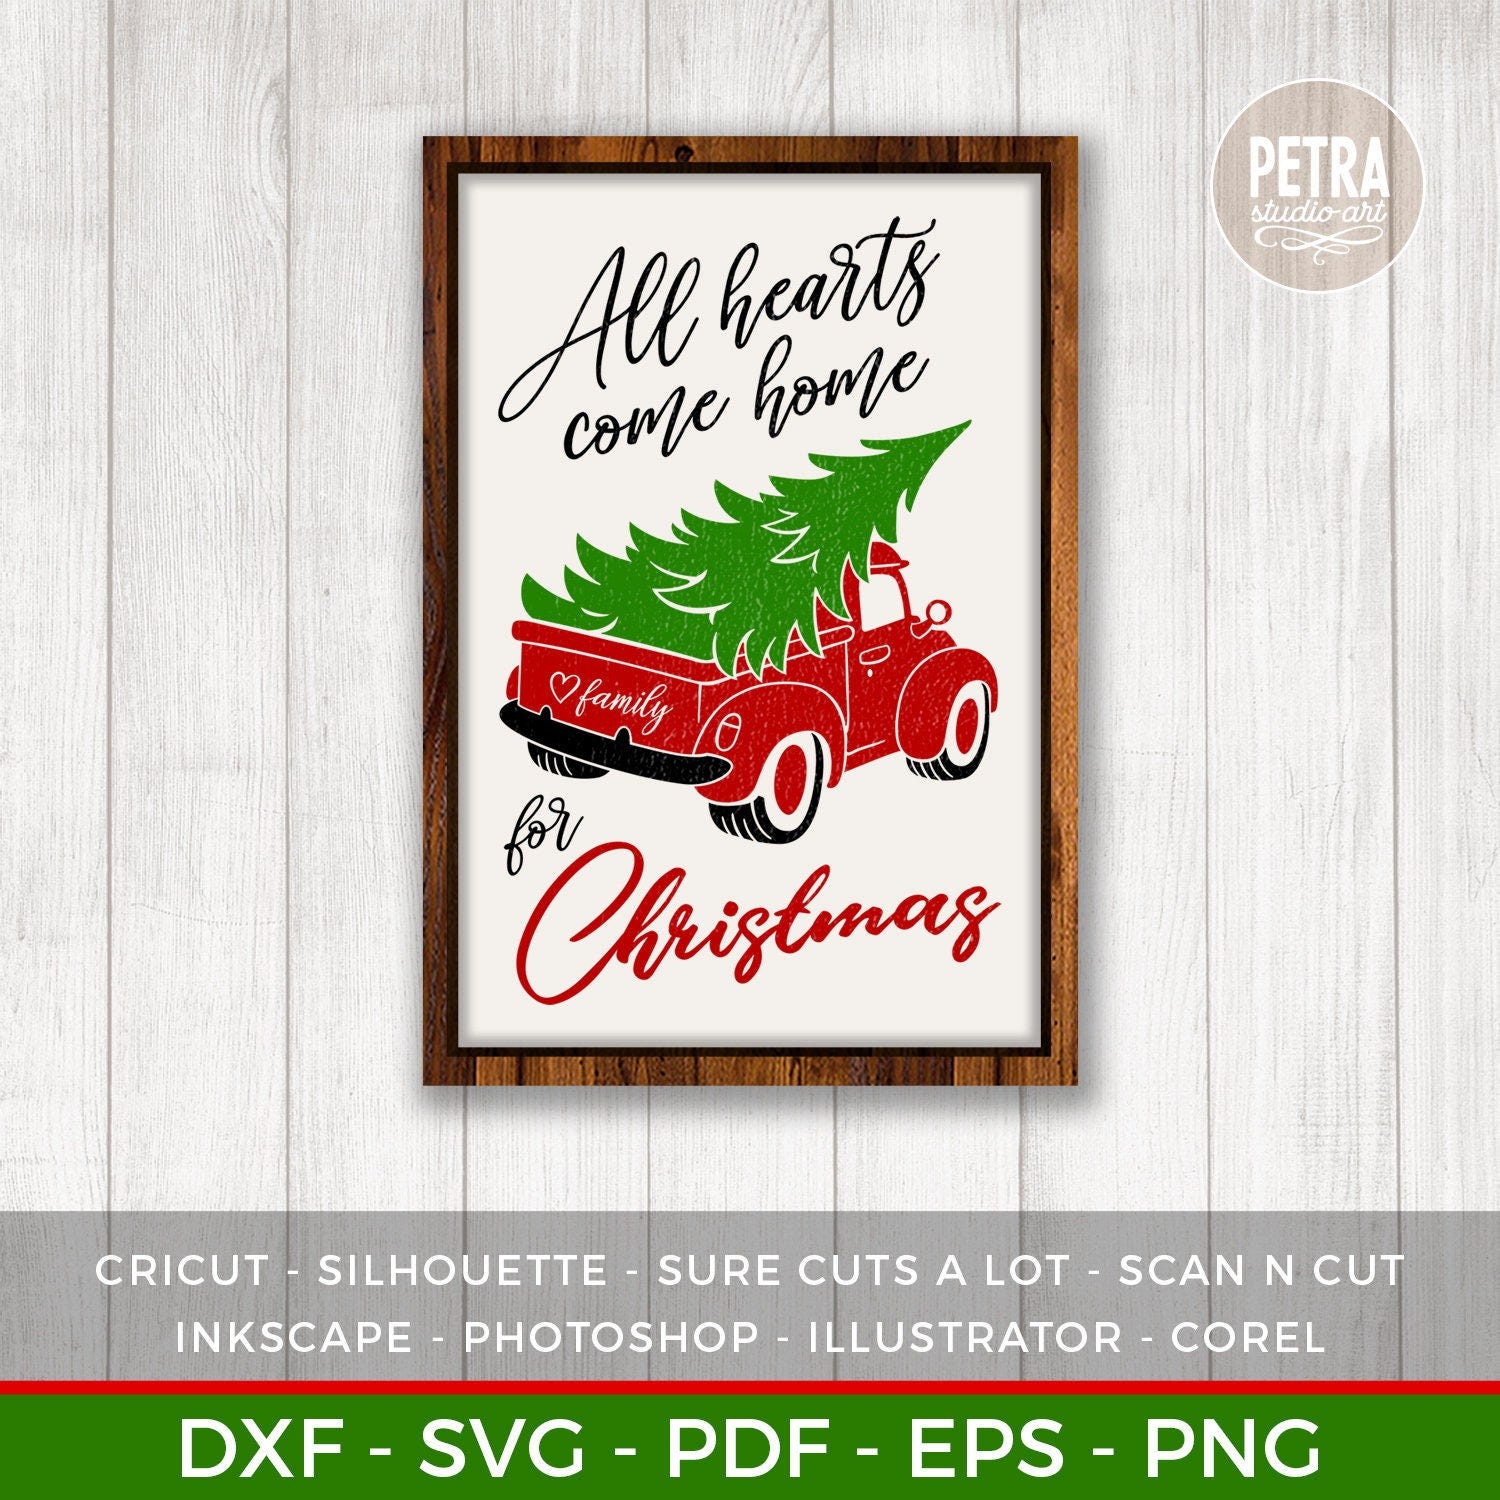 All Hearts Come Home For Christmas SVG Cut File. Great for Crafting Christmas Farmhouse Decorations.